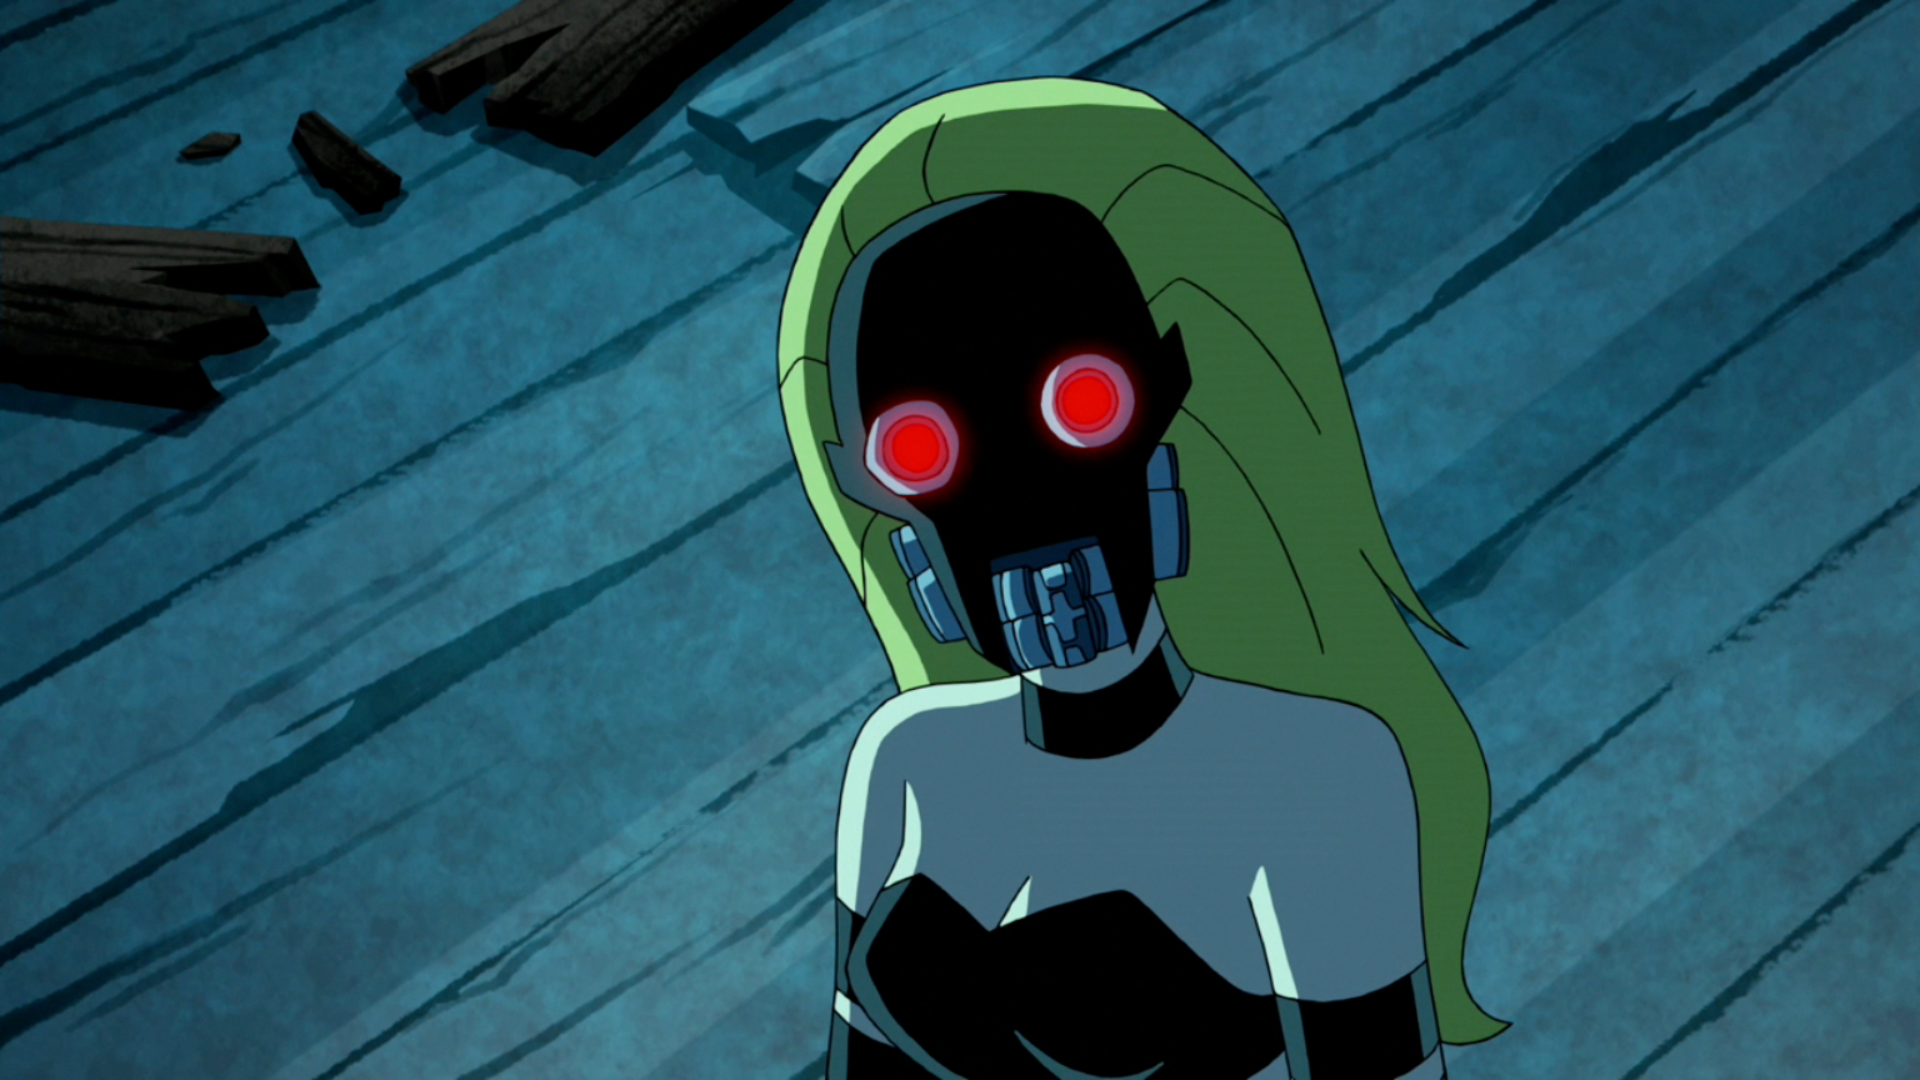 scooby doo mystery incorporated ghost girl